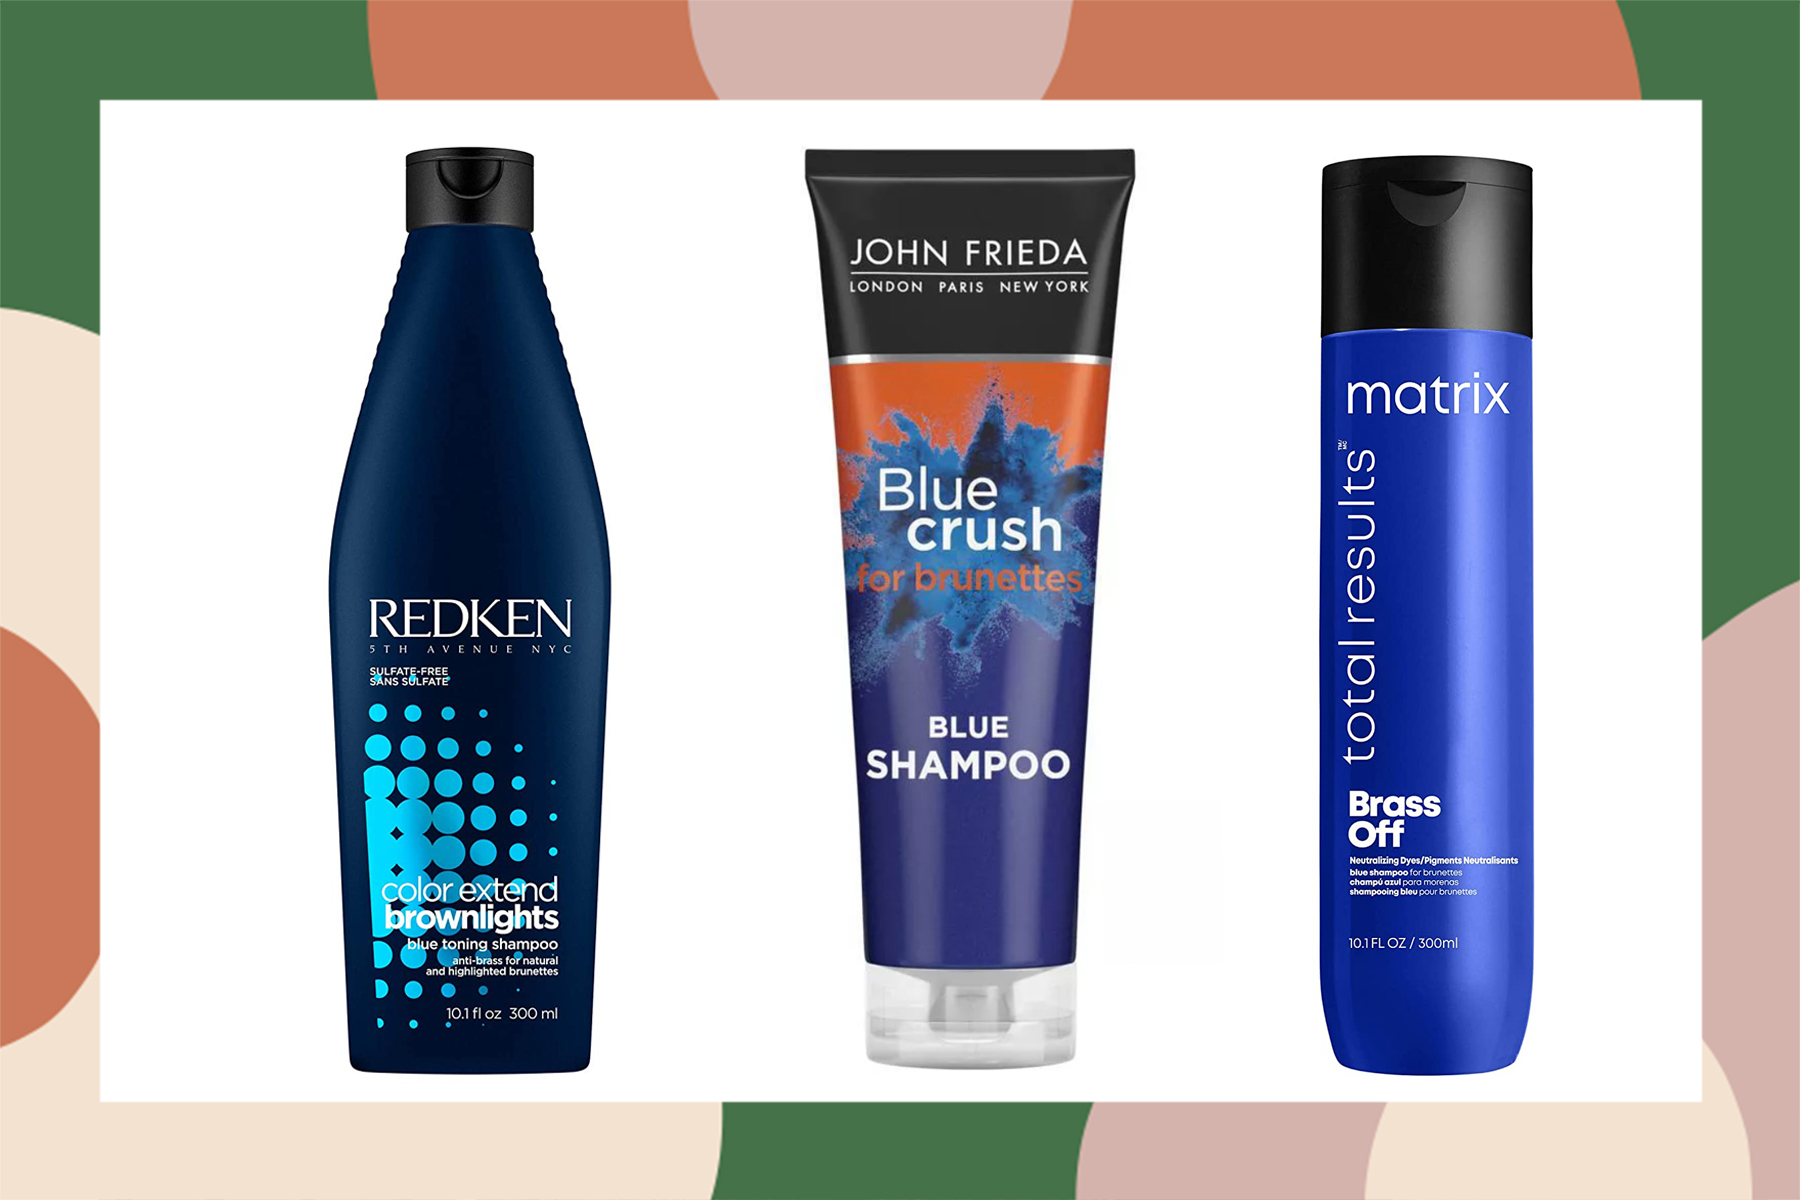 4. "Blue Shampoo for White and Silver Hair" by Redken - wide 9